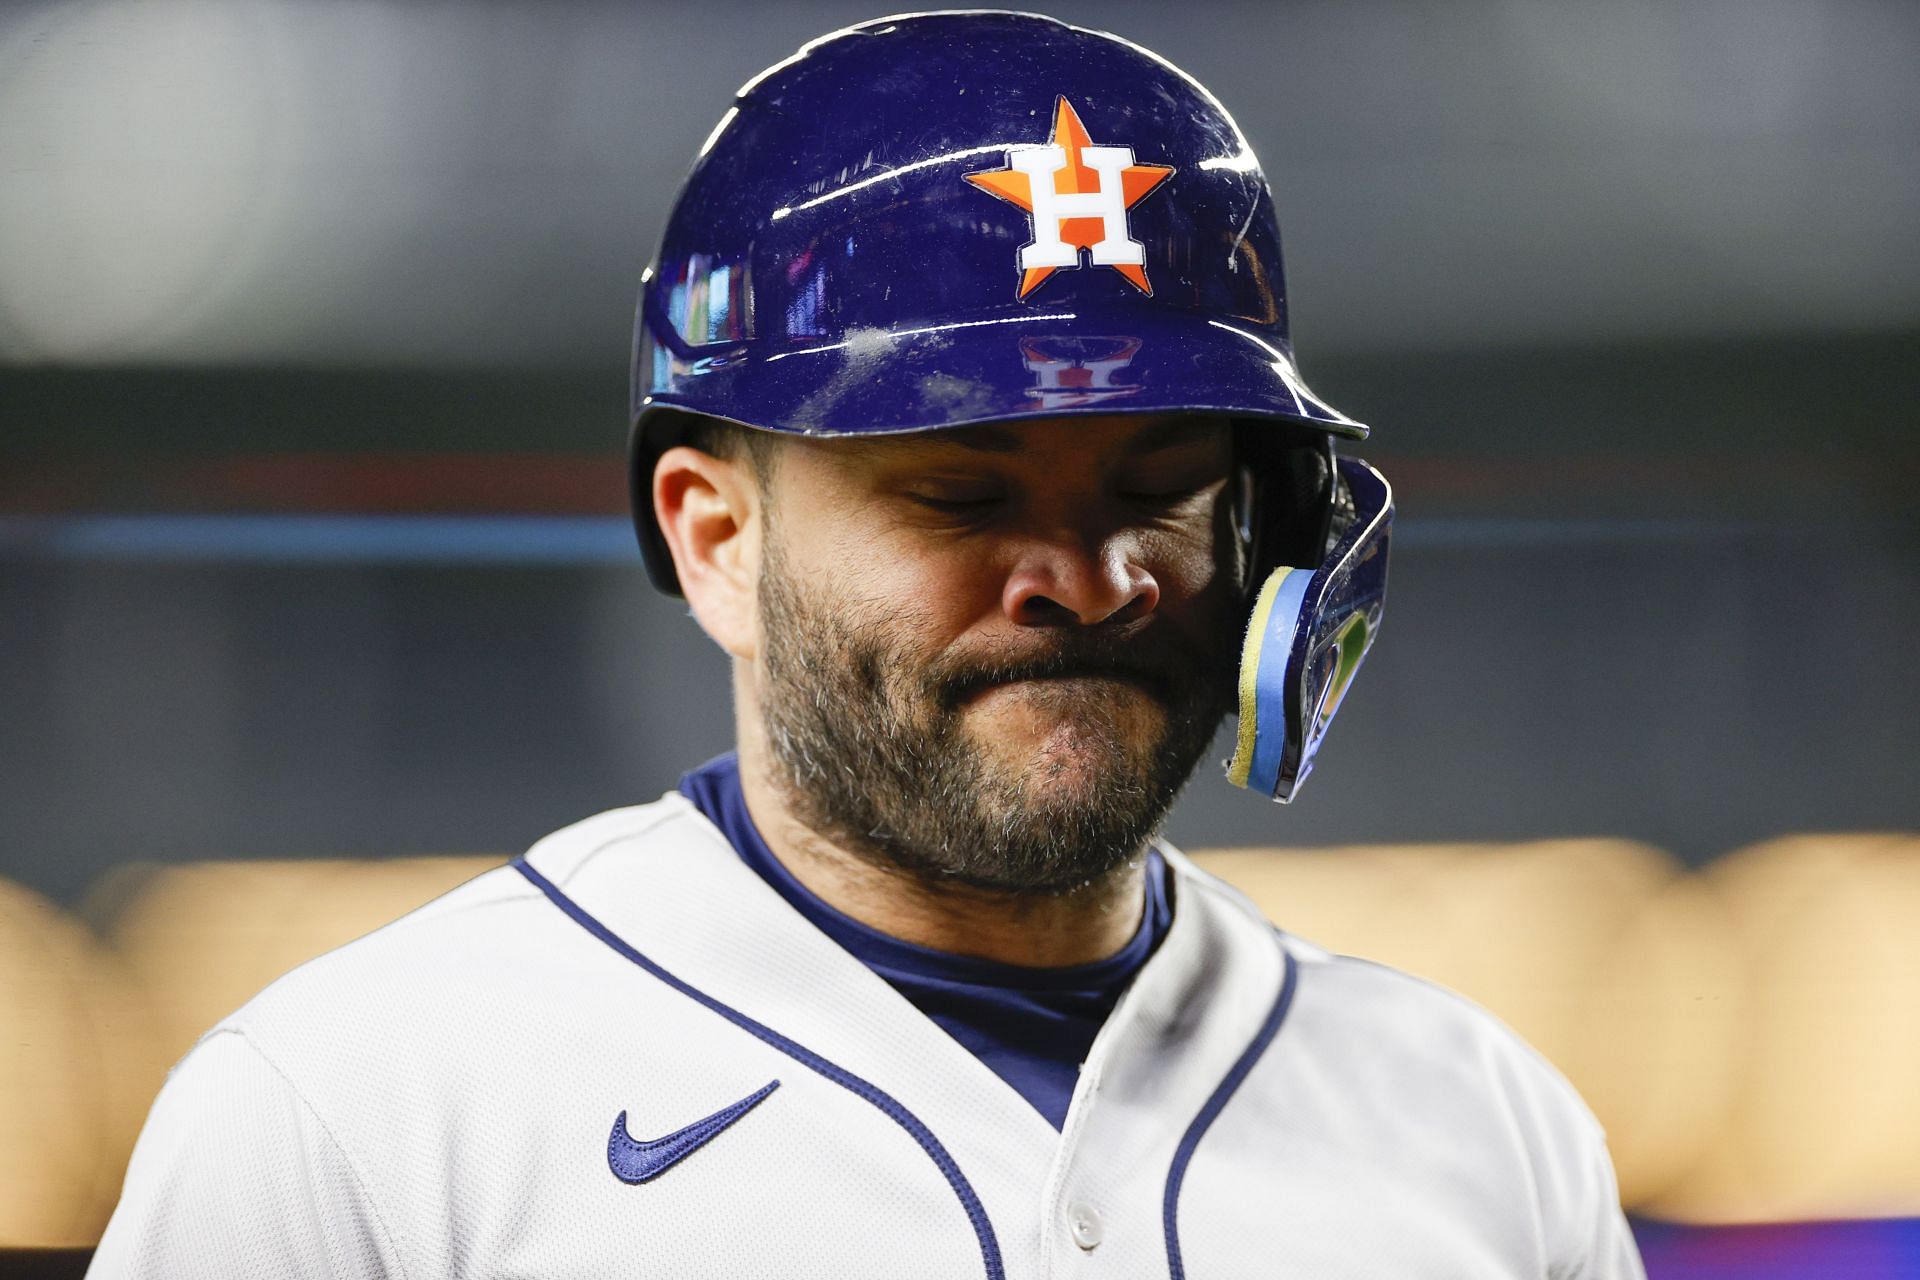 Watch all of Jose Altuve's hits in the postseason 